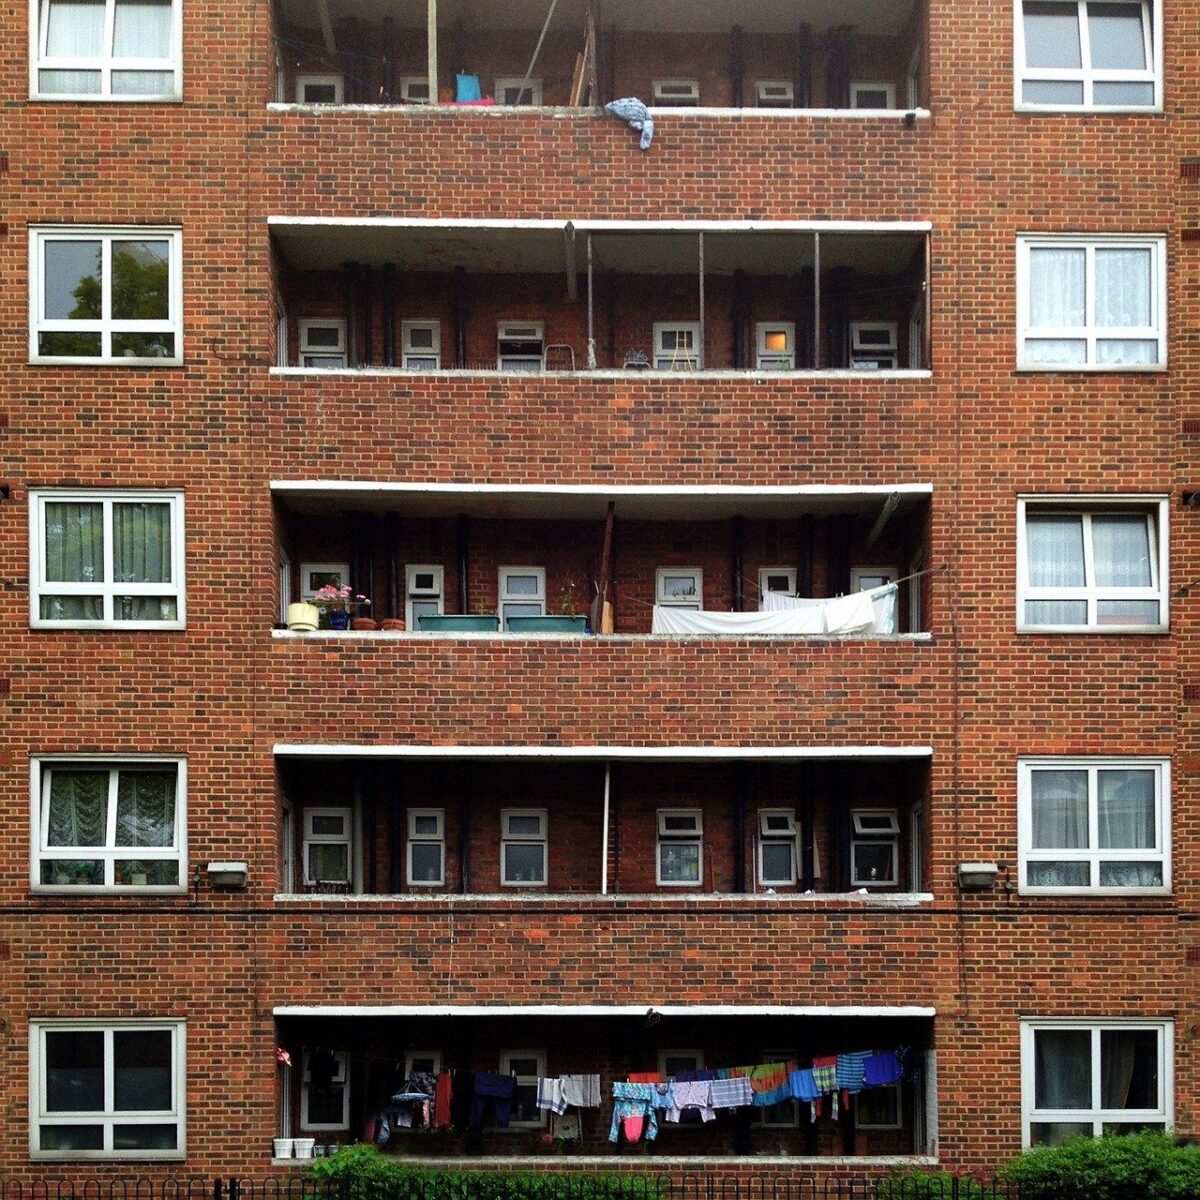 Image of block of council flats with balconies